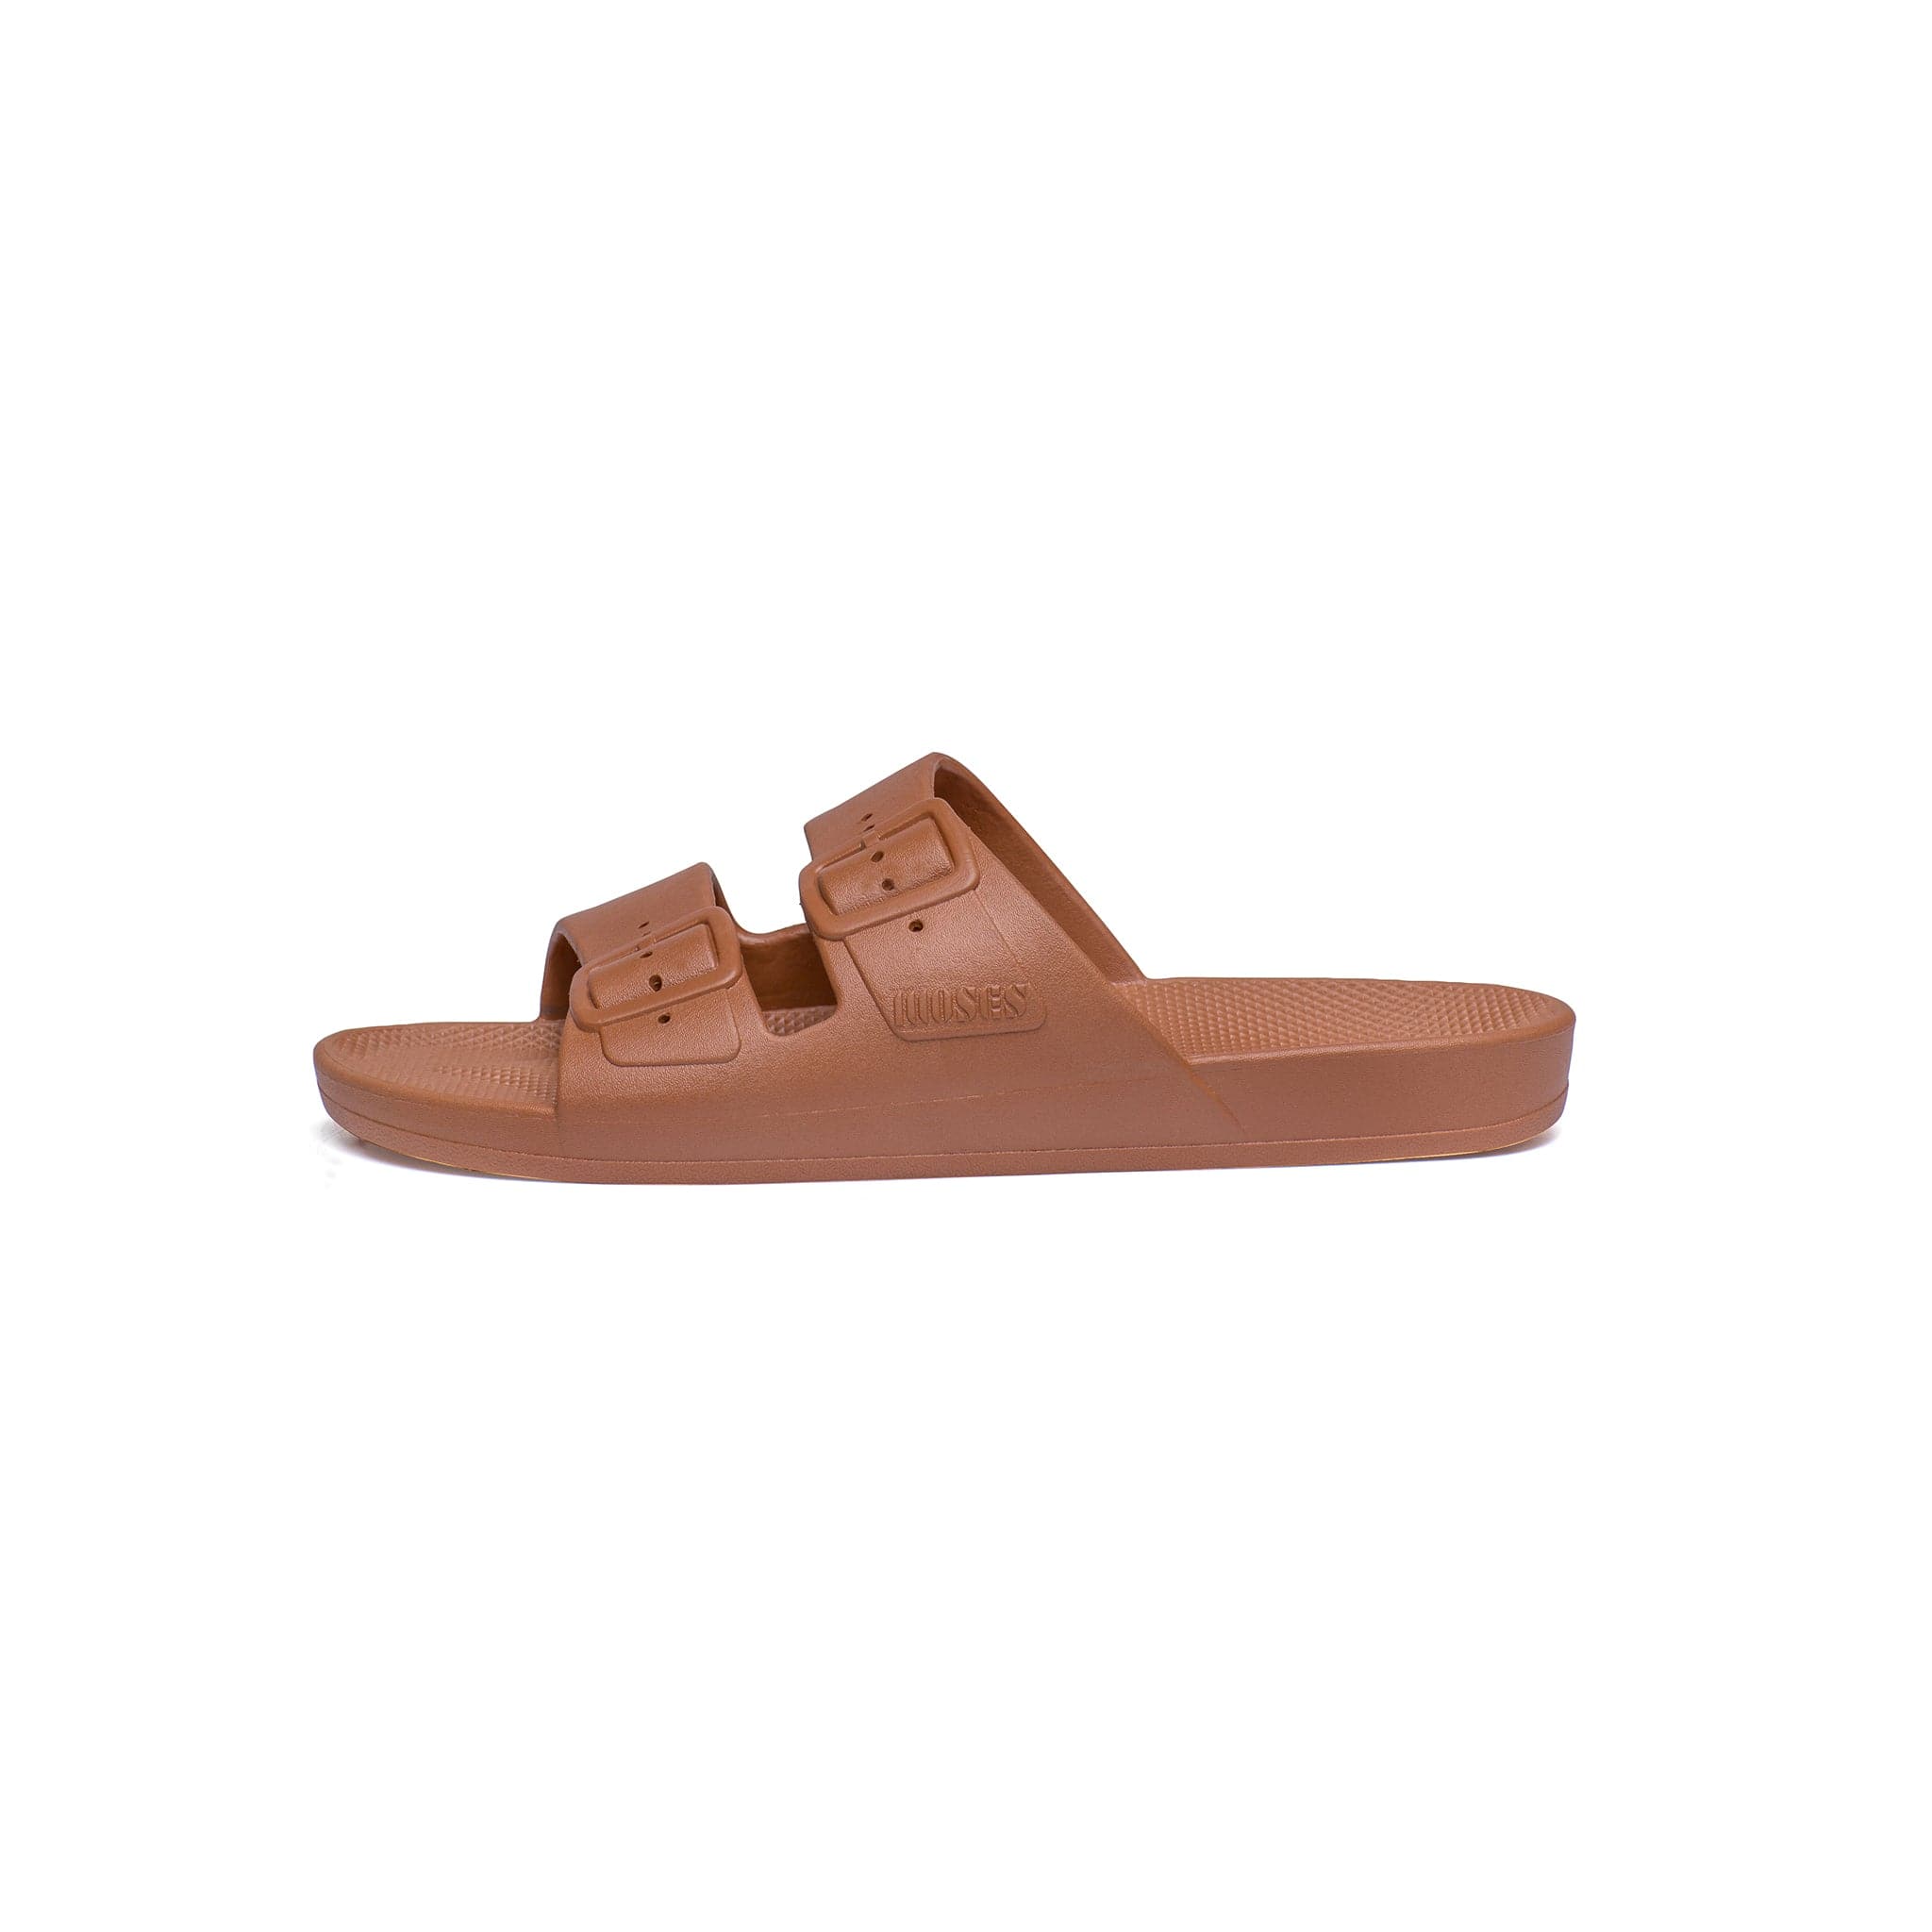 Freedom Moses | KIDS Slides - Toffee